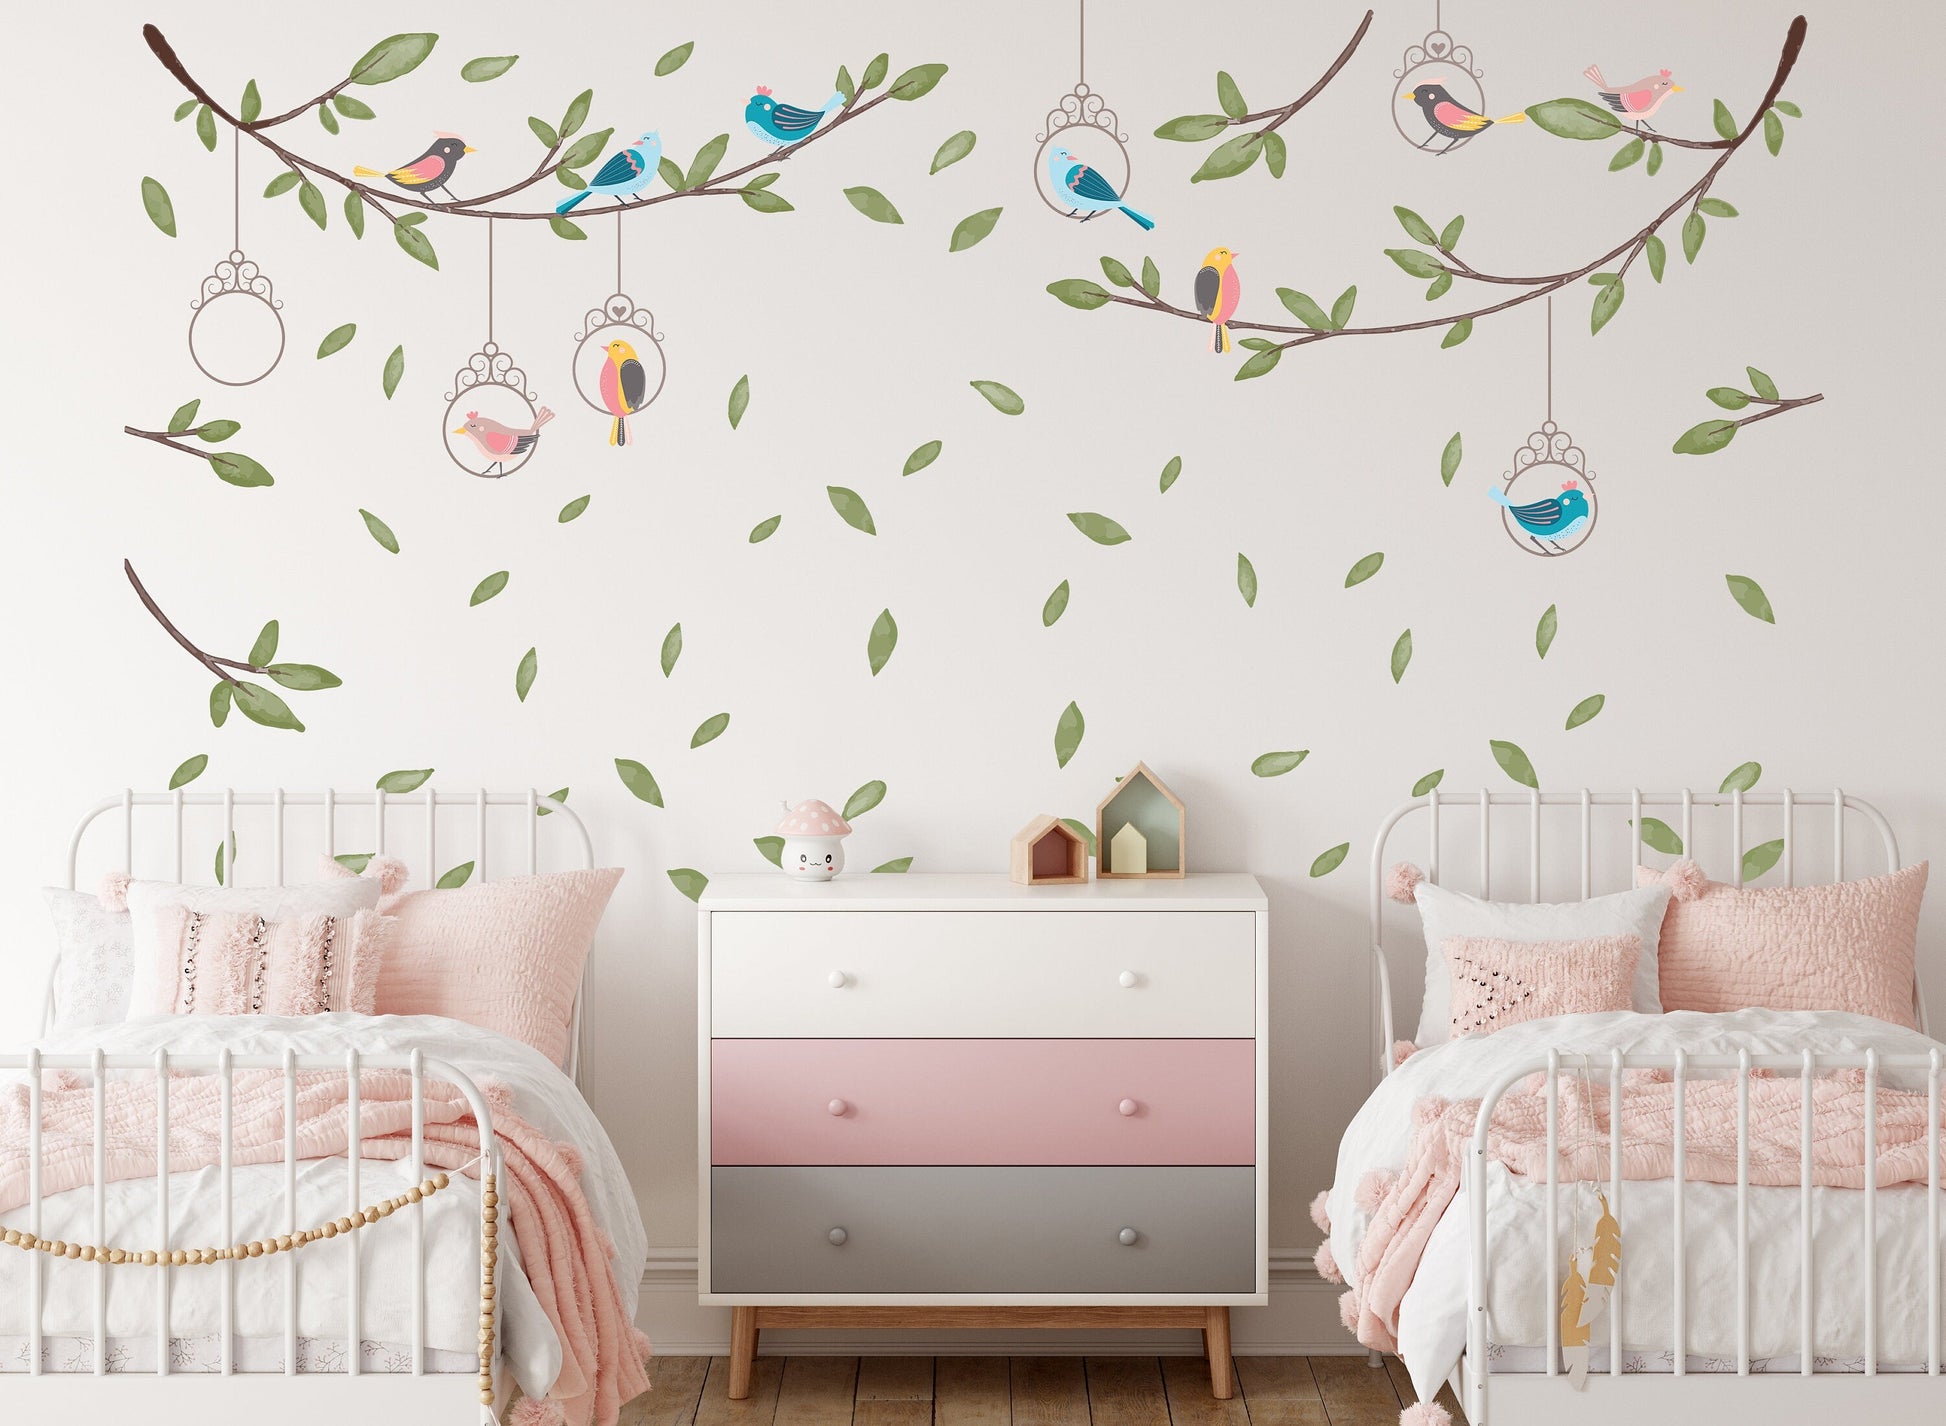 Large Tree Branch Wall Sticker Birds Decals Greenery Twig Nature Boho Nursery Leaves Room Decoration, LF563A